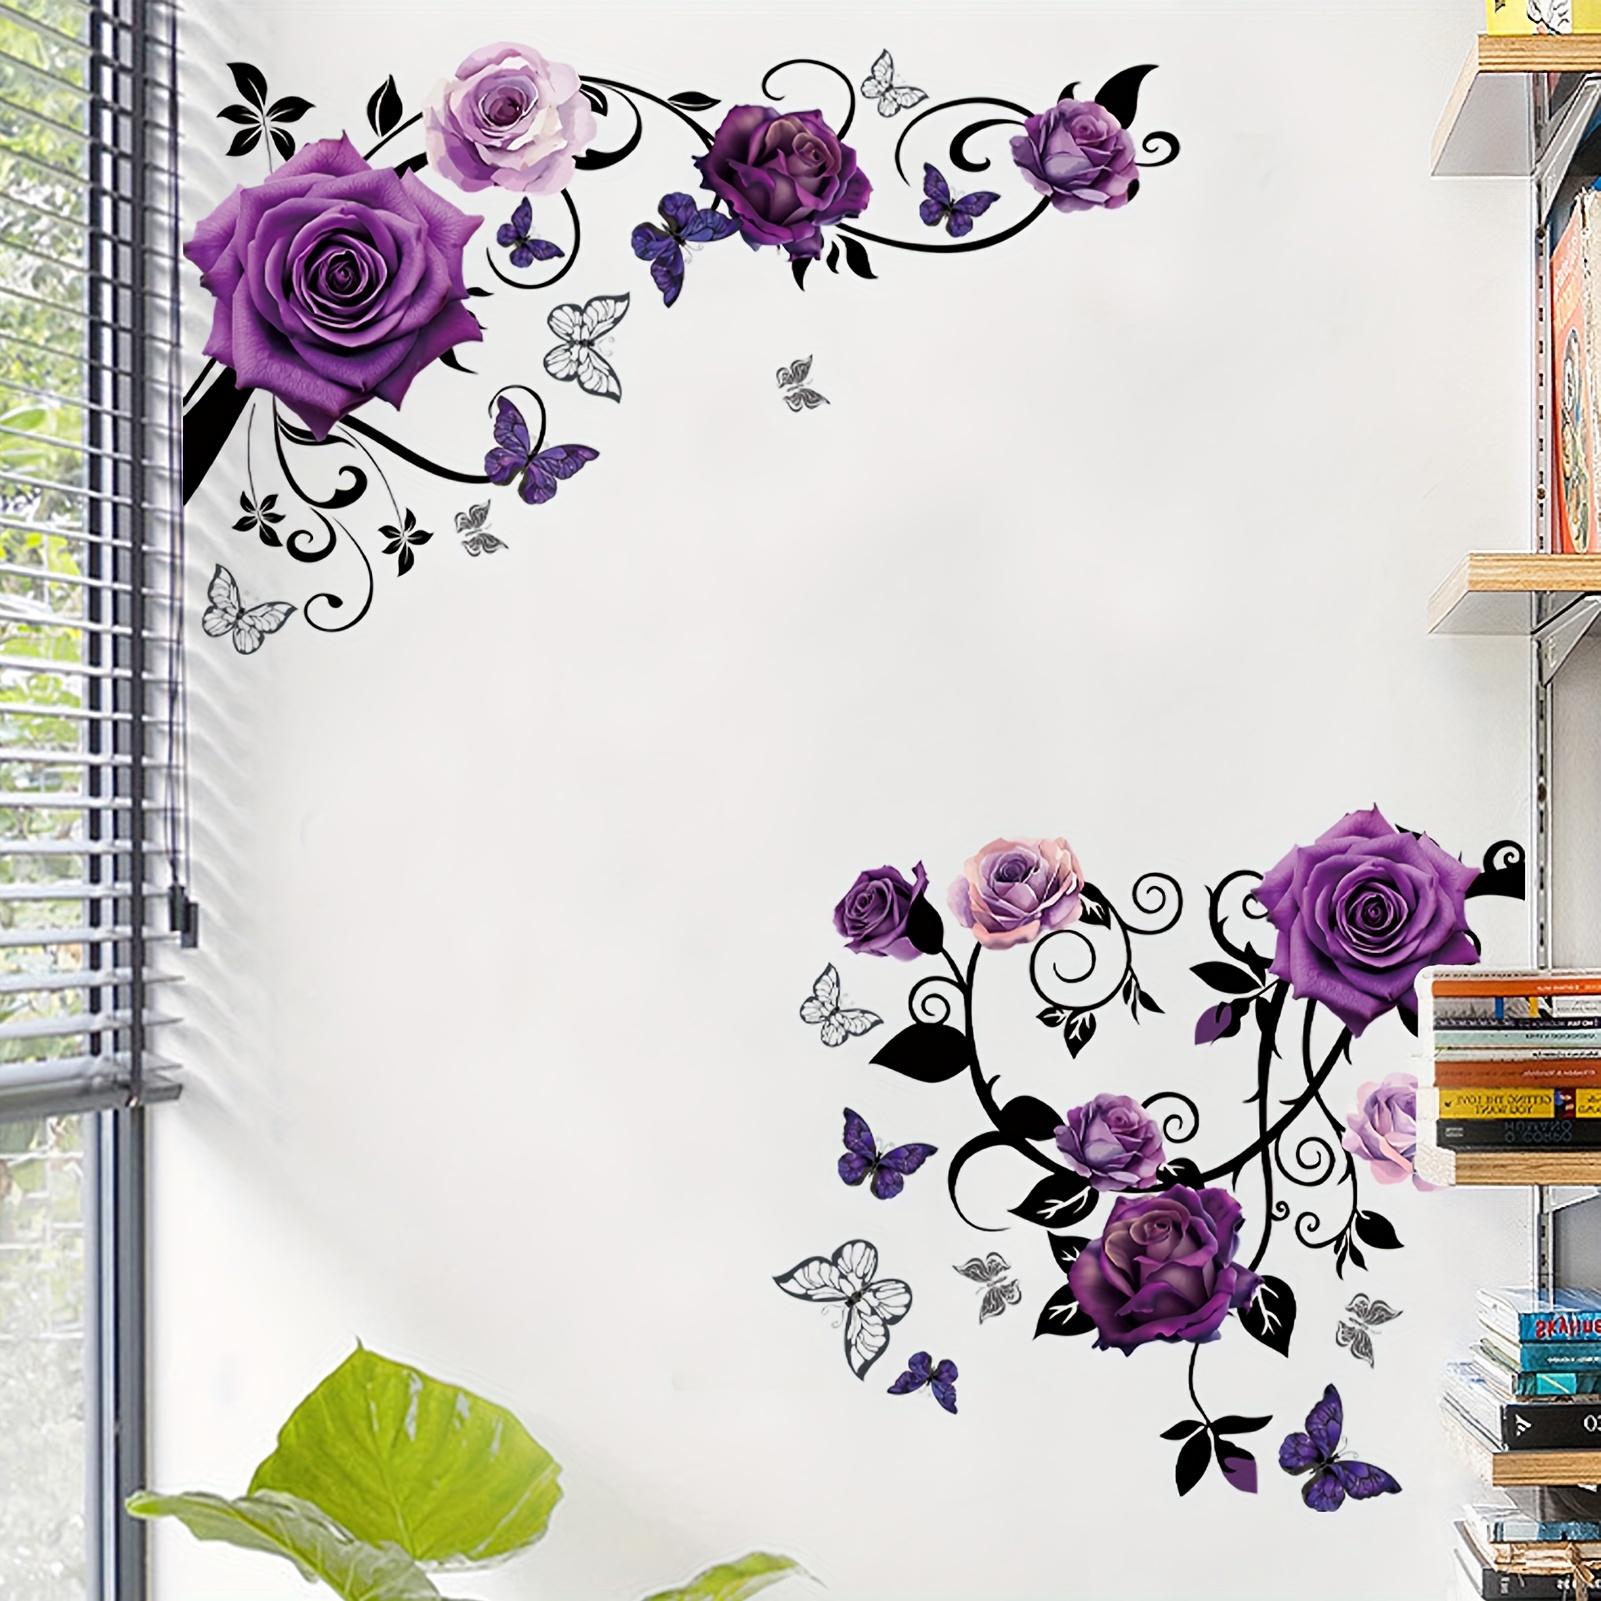 

Flower Wall Decals Peel And Stick Romantic Purple Rose Flowers Wall Decals Sticker Butterfly Home Kitchen Bathroom Door Decor Diy Floral Wall Decals For Bedroom Living Room Home Decoration